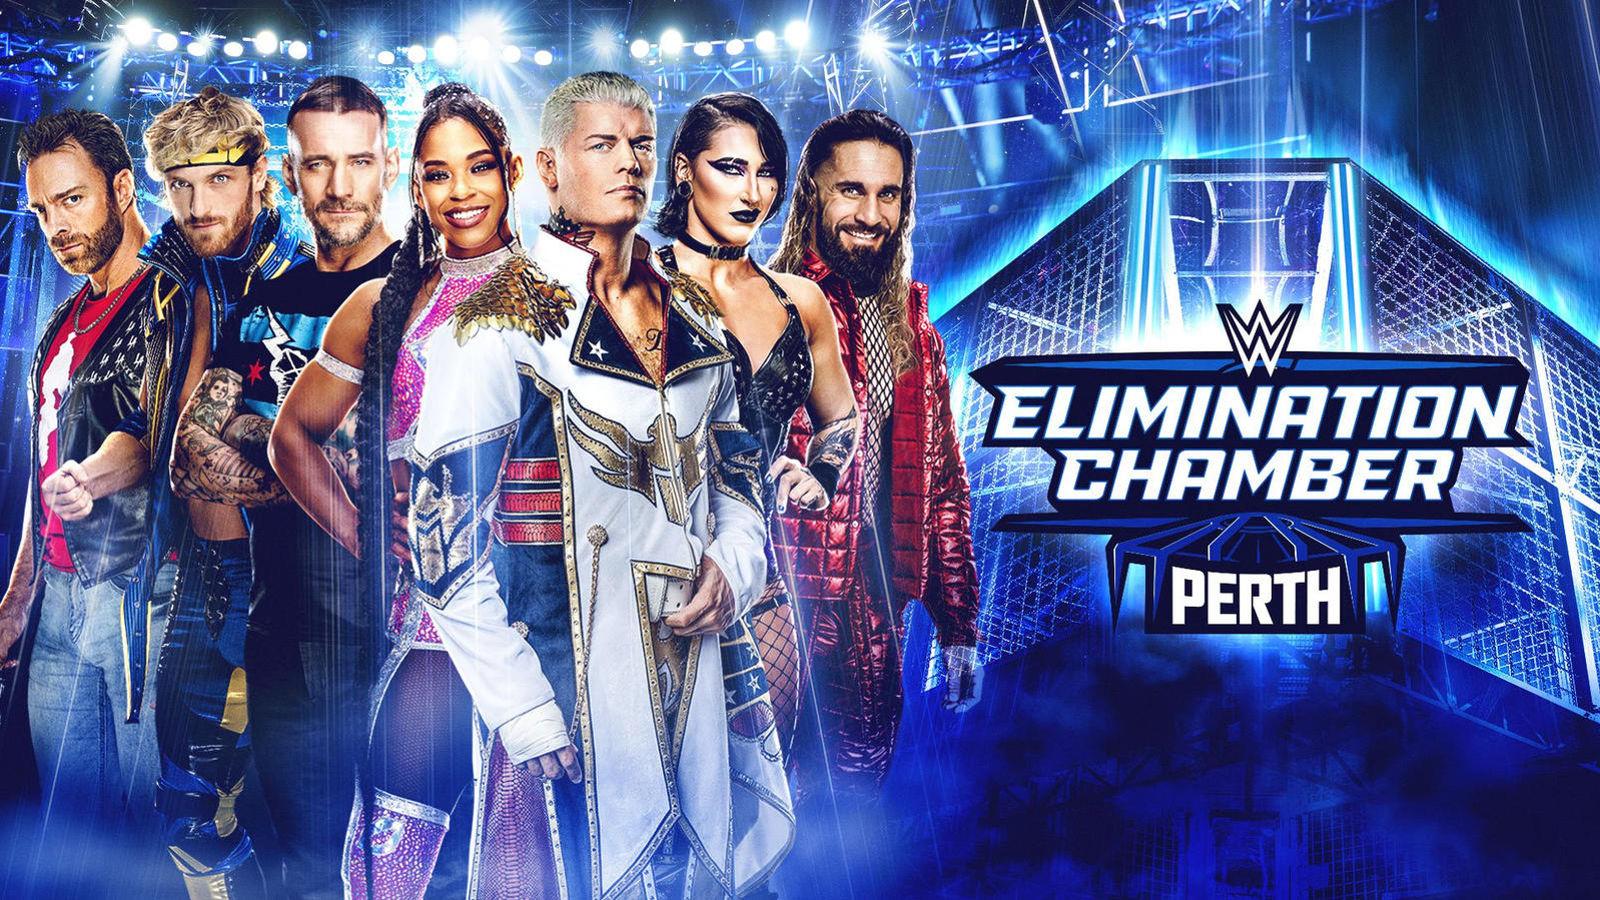 WWE Elimination Chamber poster.